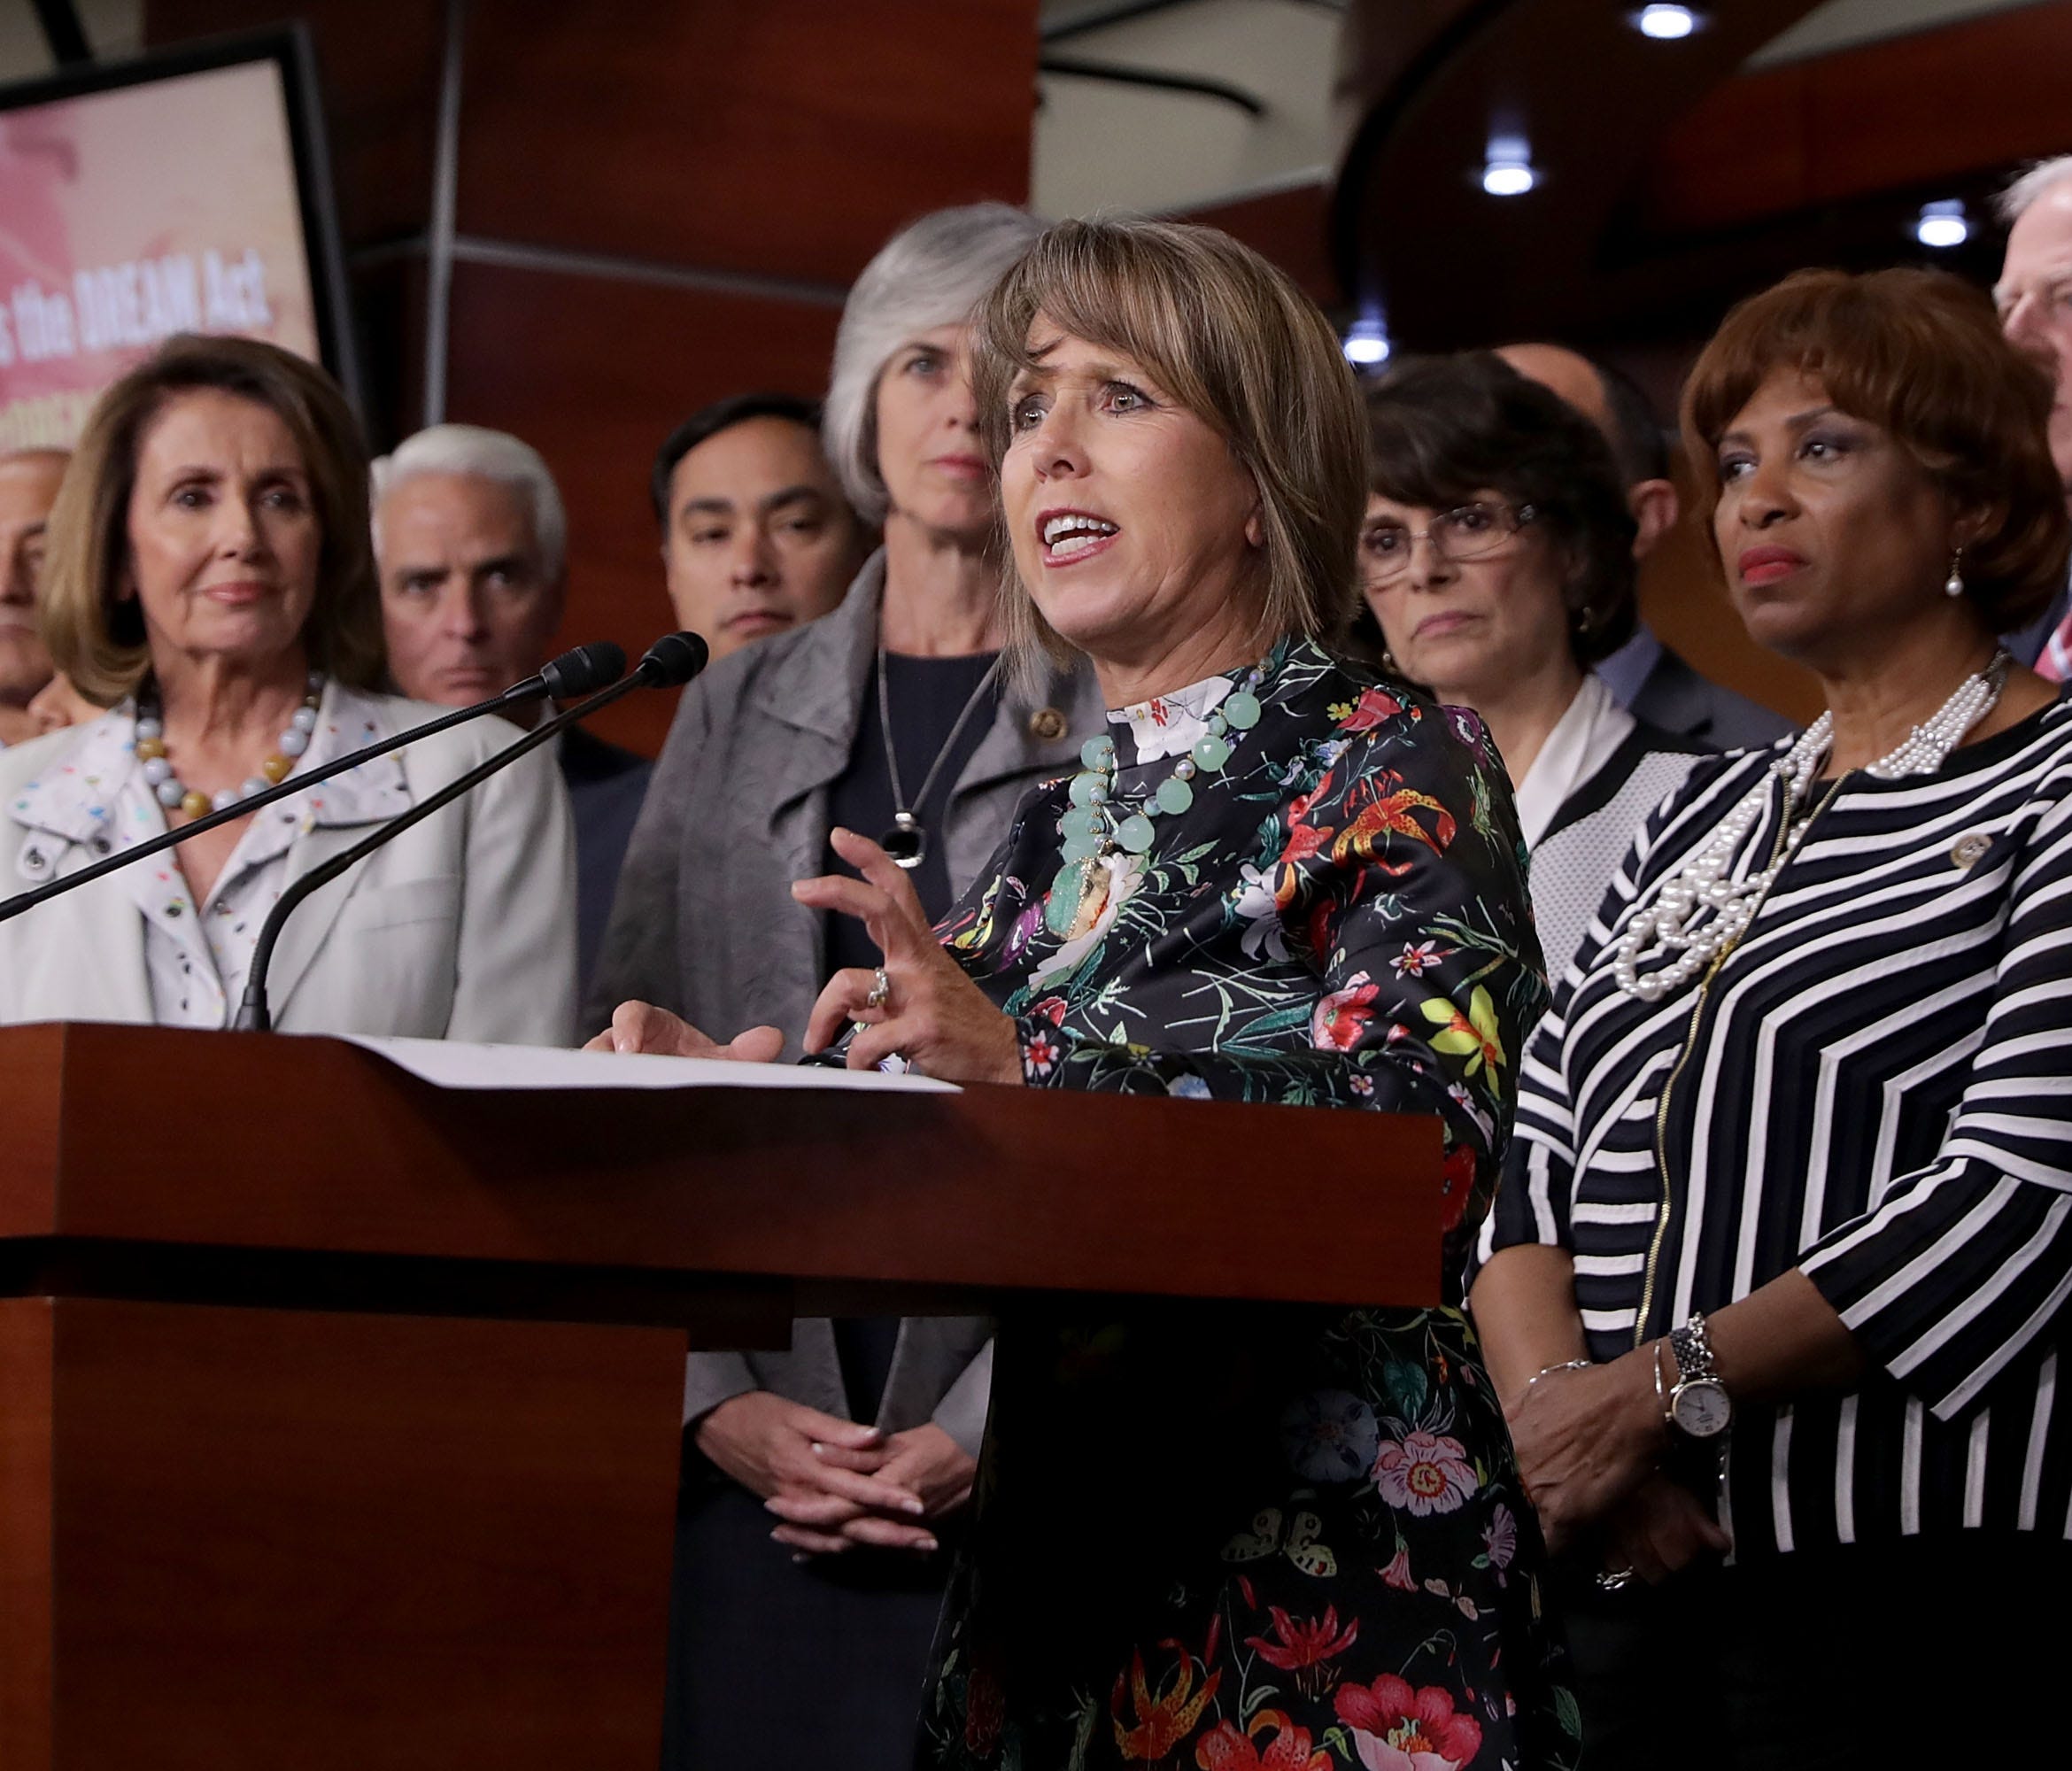 Congressional Hispanic Caucus Chairwoman Michelle Lujan Grisham is joined by about 25 fellow House Democrats to introduce a petition to force a vote on the DREAM Act during a news conference at the U.S. Capitol on Sept. 25, 2017.